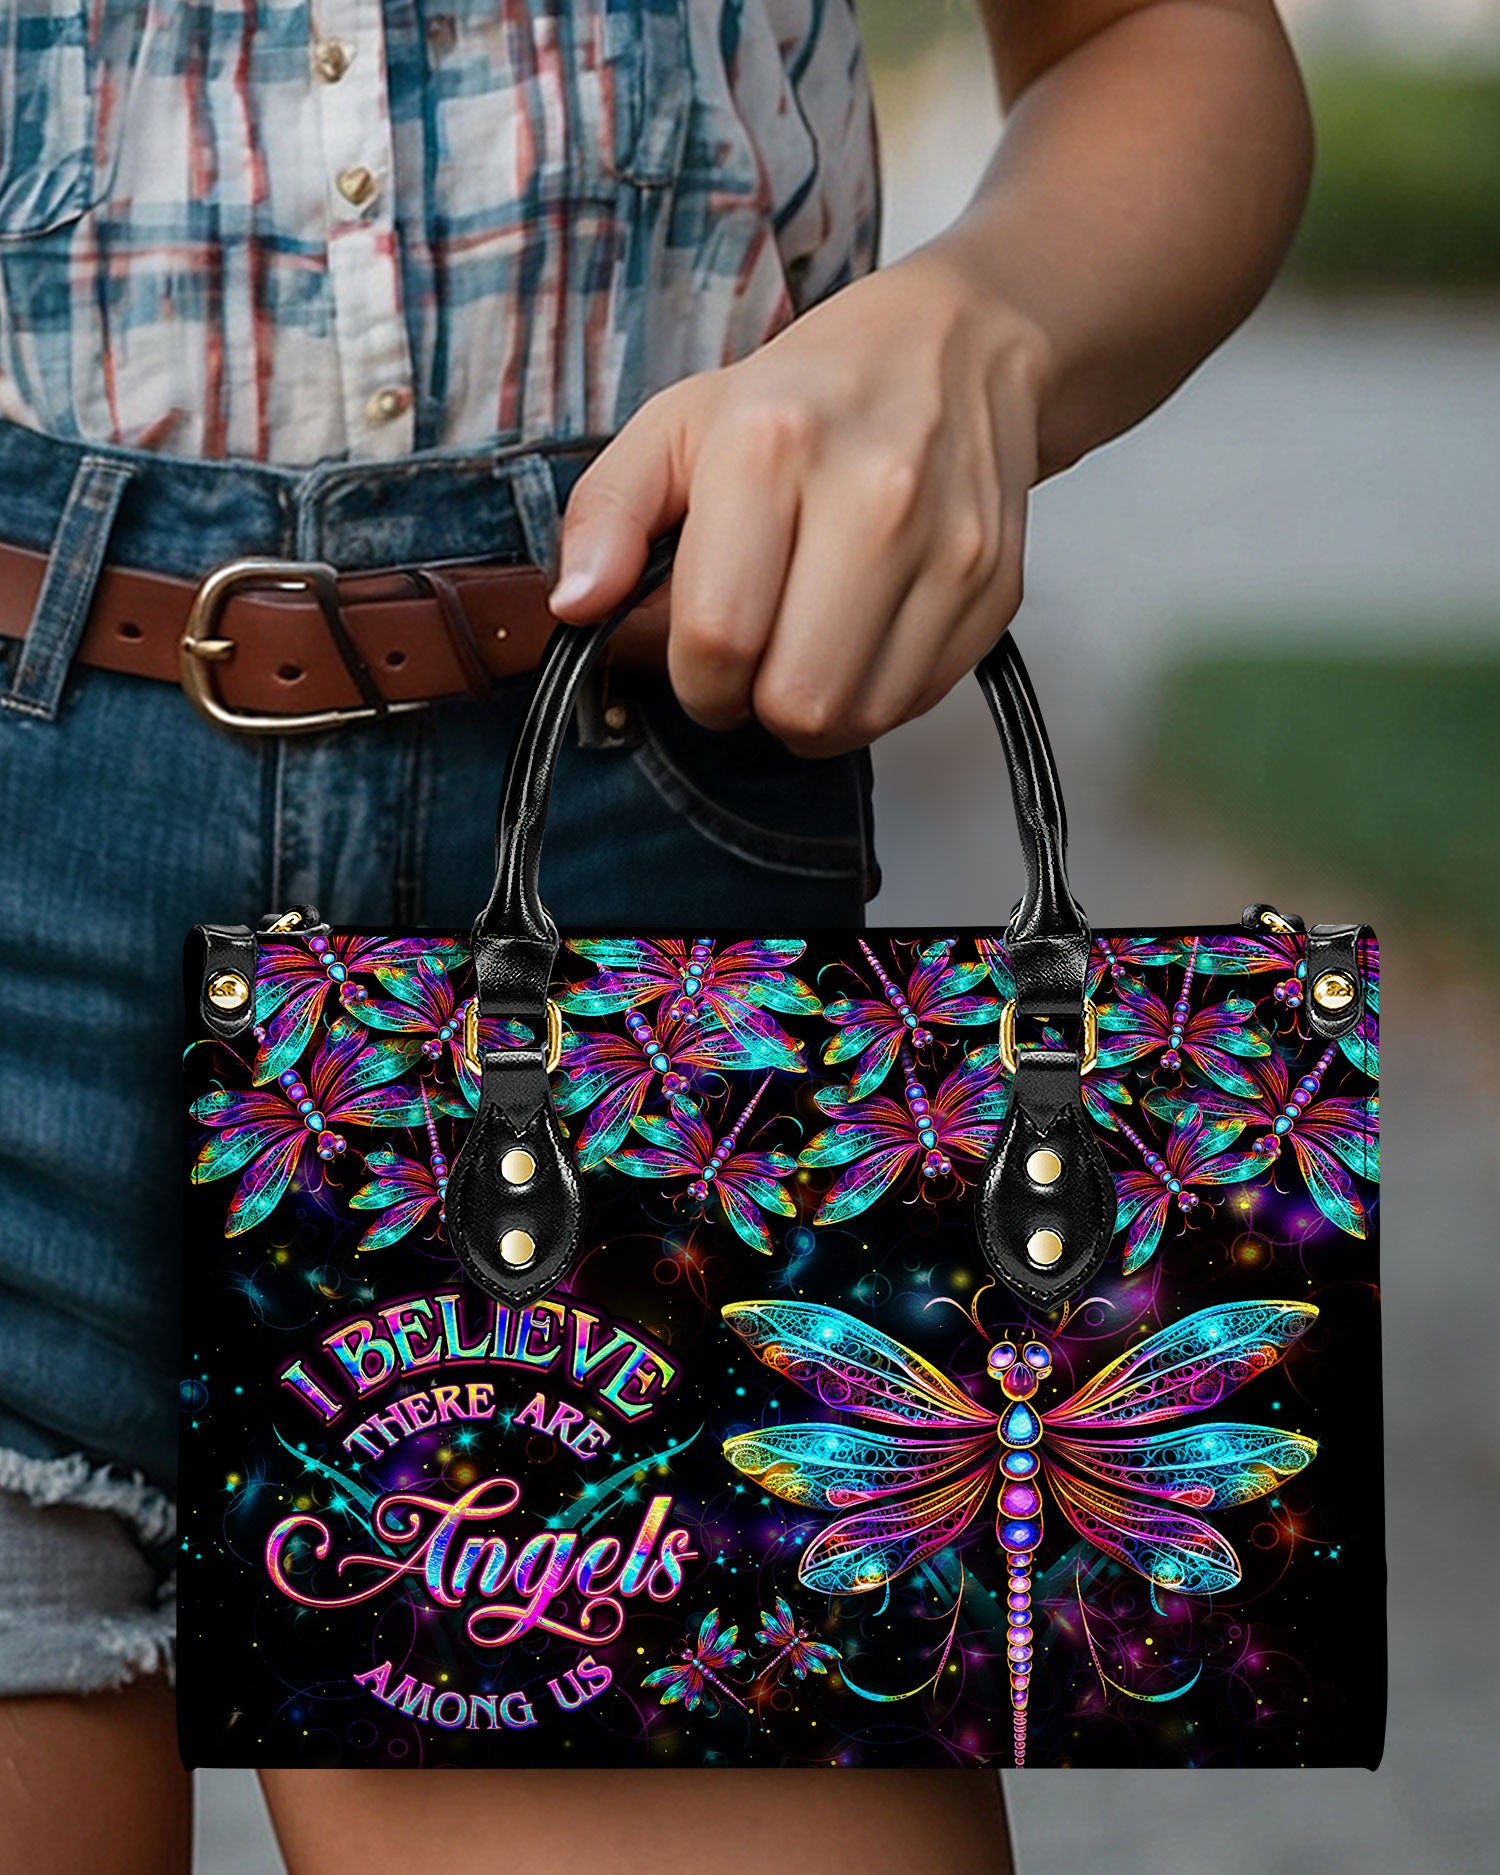 I BELIEVE THERE ARE ANGELS AMONG US LEATHER HANDBAG - YHDU2203244